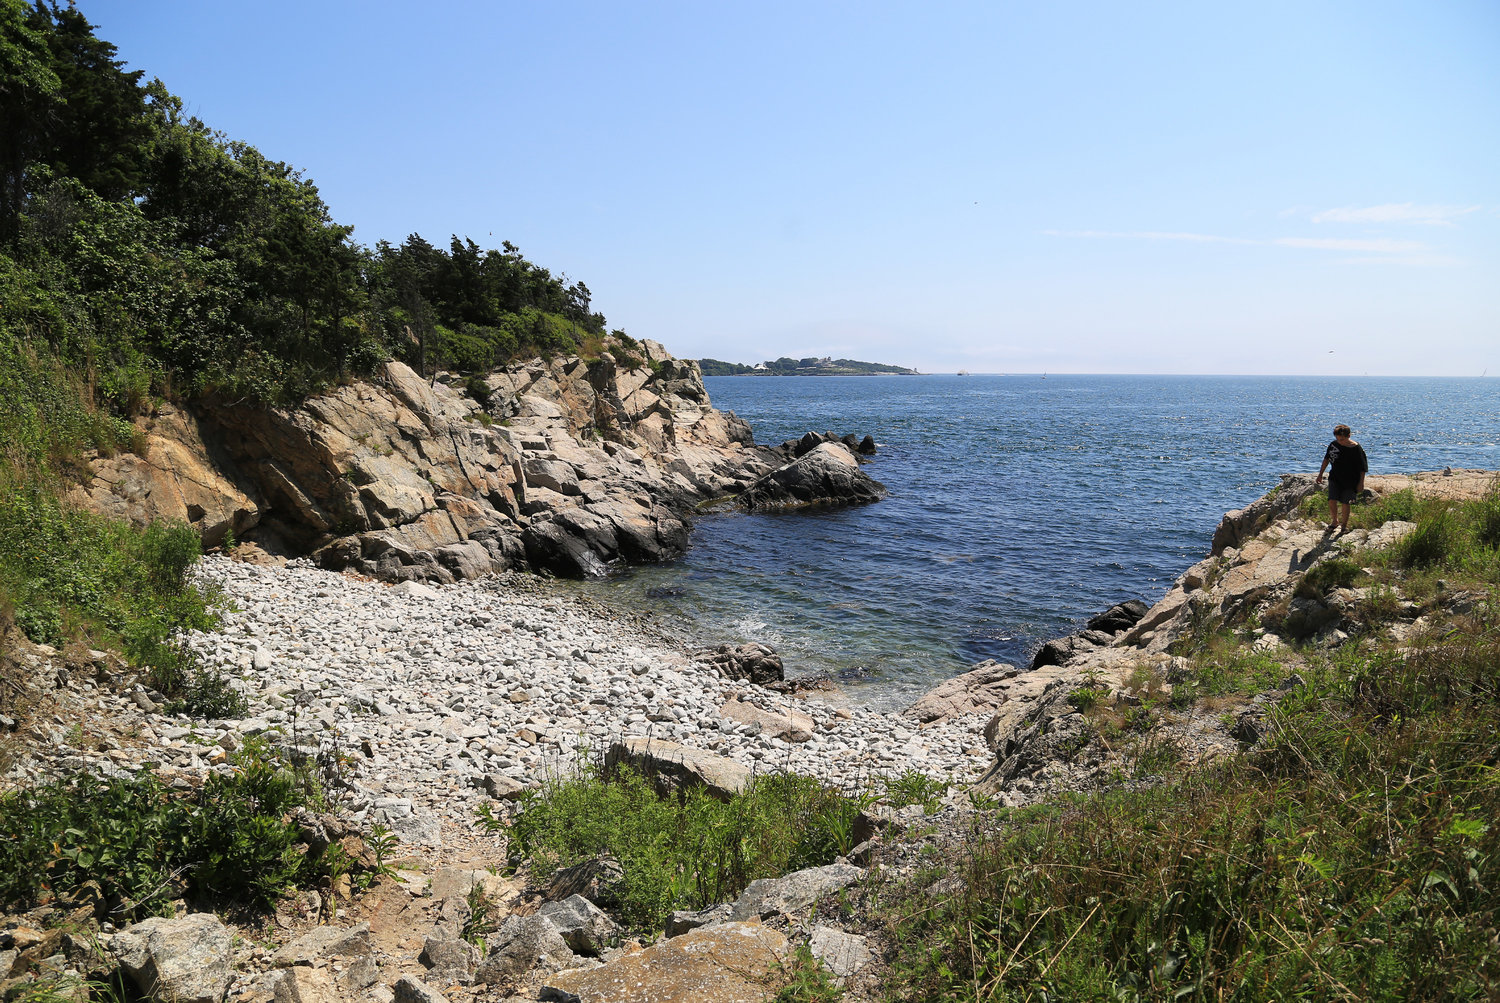 Explore, picnic, fish, and hike on Fort Wetherill’s 61+ acres, a former coastal defense battery and training camp